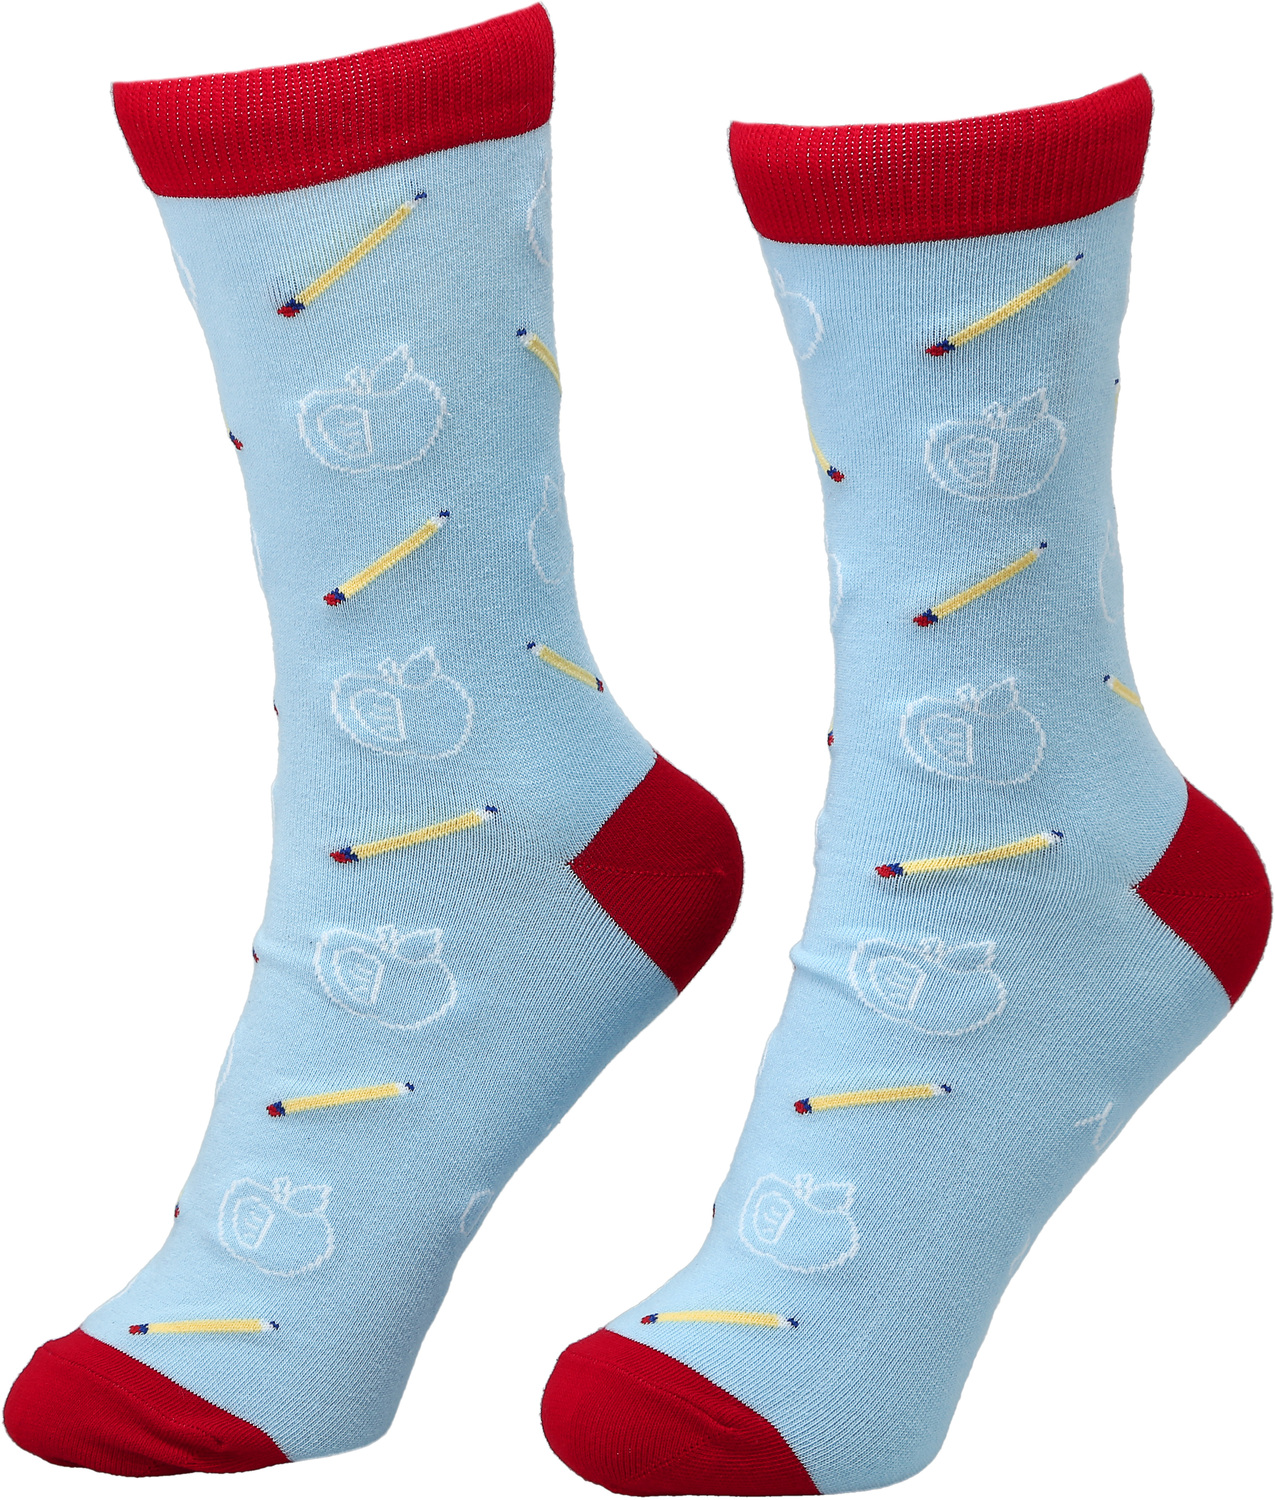 Off Duty by Teachable Moments - Off Duty - Unisex S/M Cotton Blend Socks